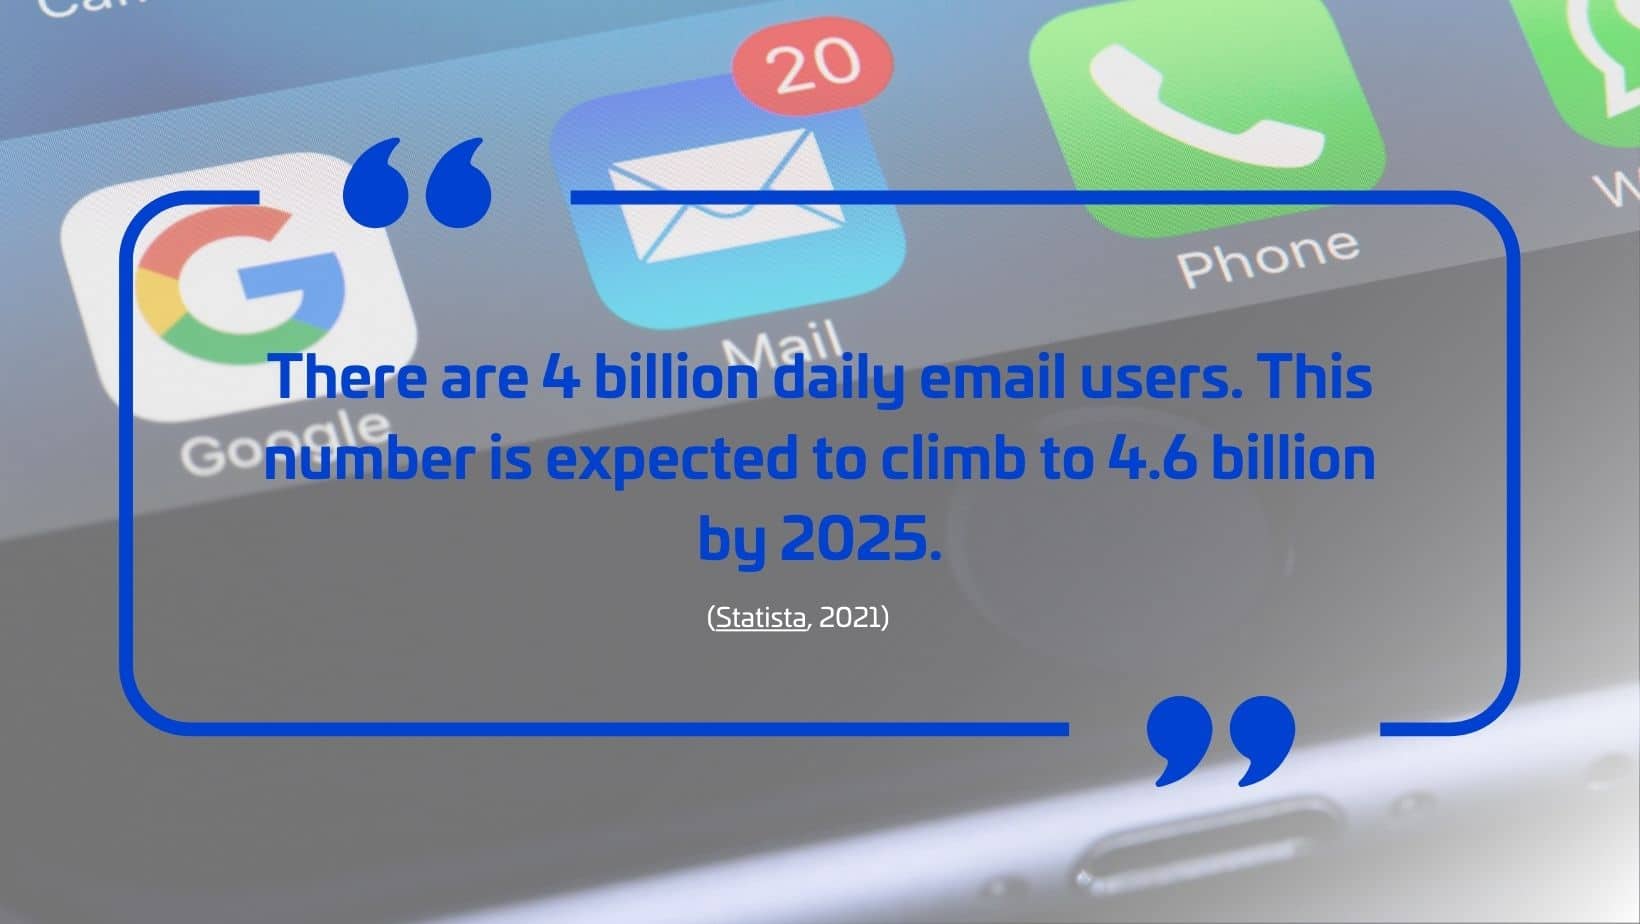 a quote with data about email growth, supporting info on hotel trends in technology